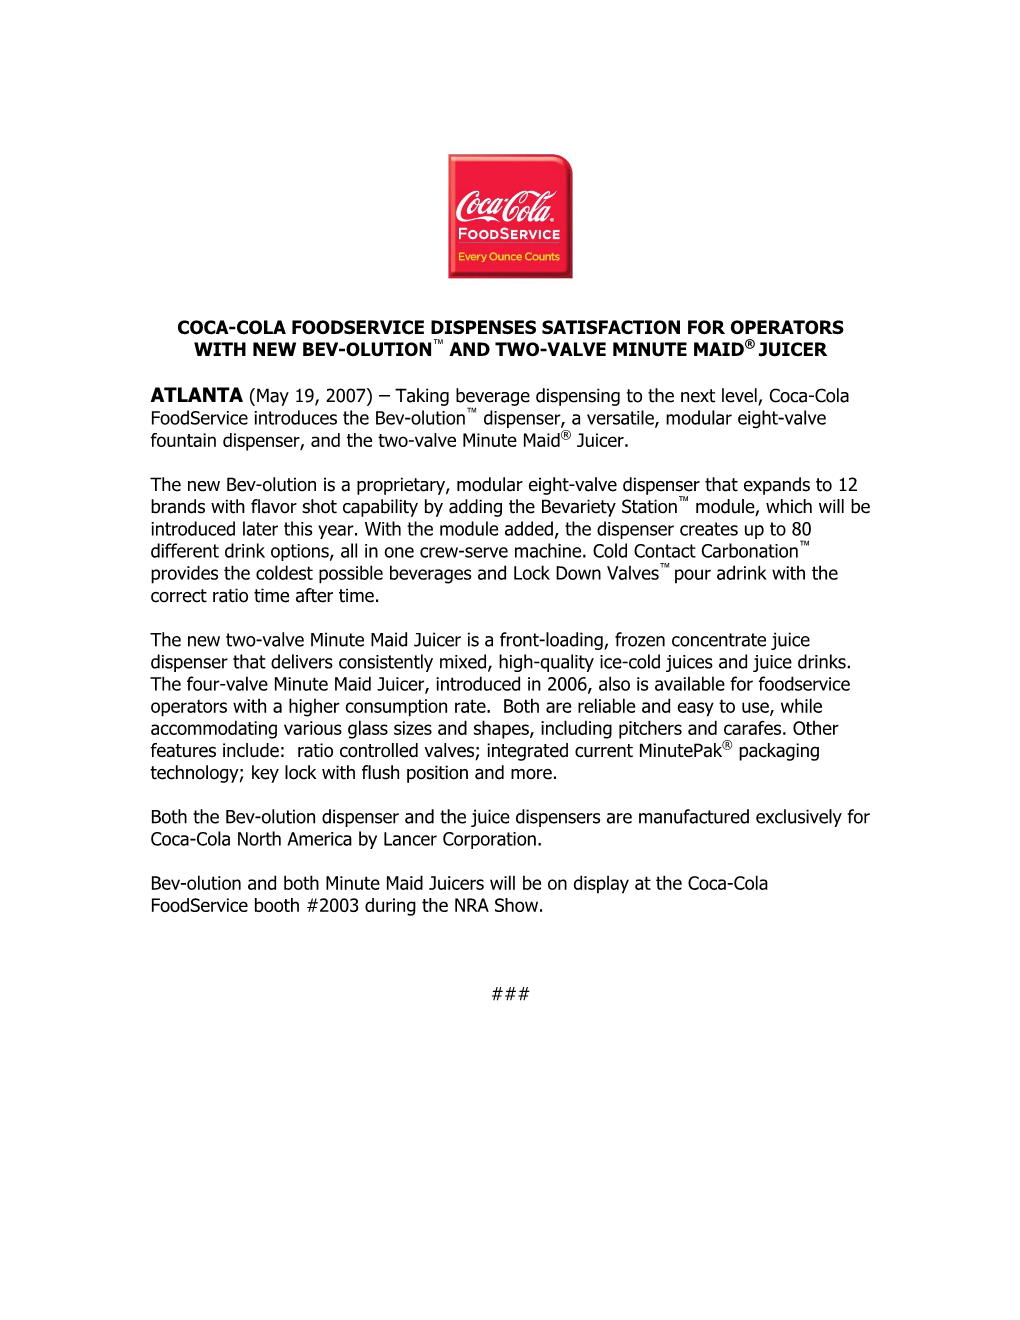 Coca-Cola Foodservice Dispenses Satisfaction for Operators with New Bev-Olution™ and Two-Valve Minute Maid® Juicer Atlanta